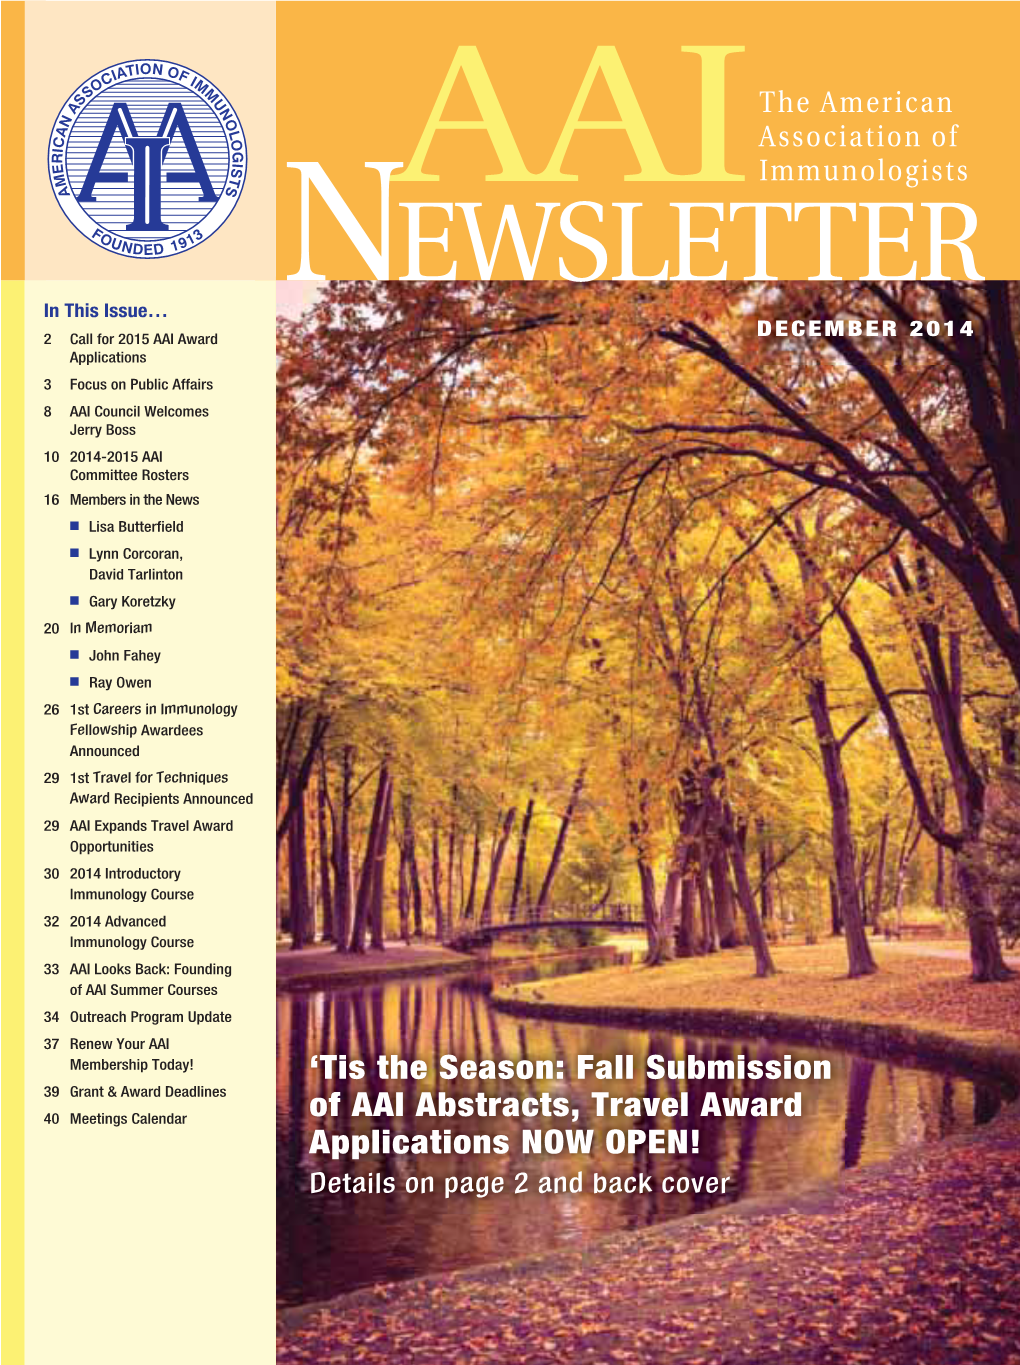 'Tis the Season: Fall Submission of AAI Abstracts, Travel Award